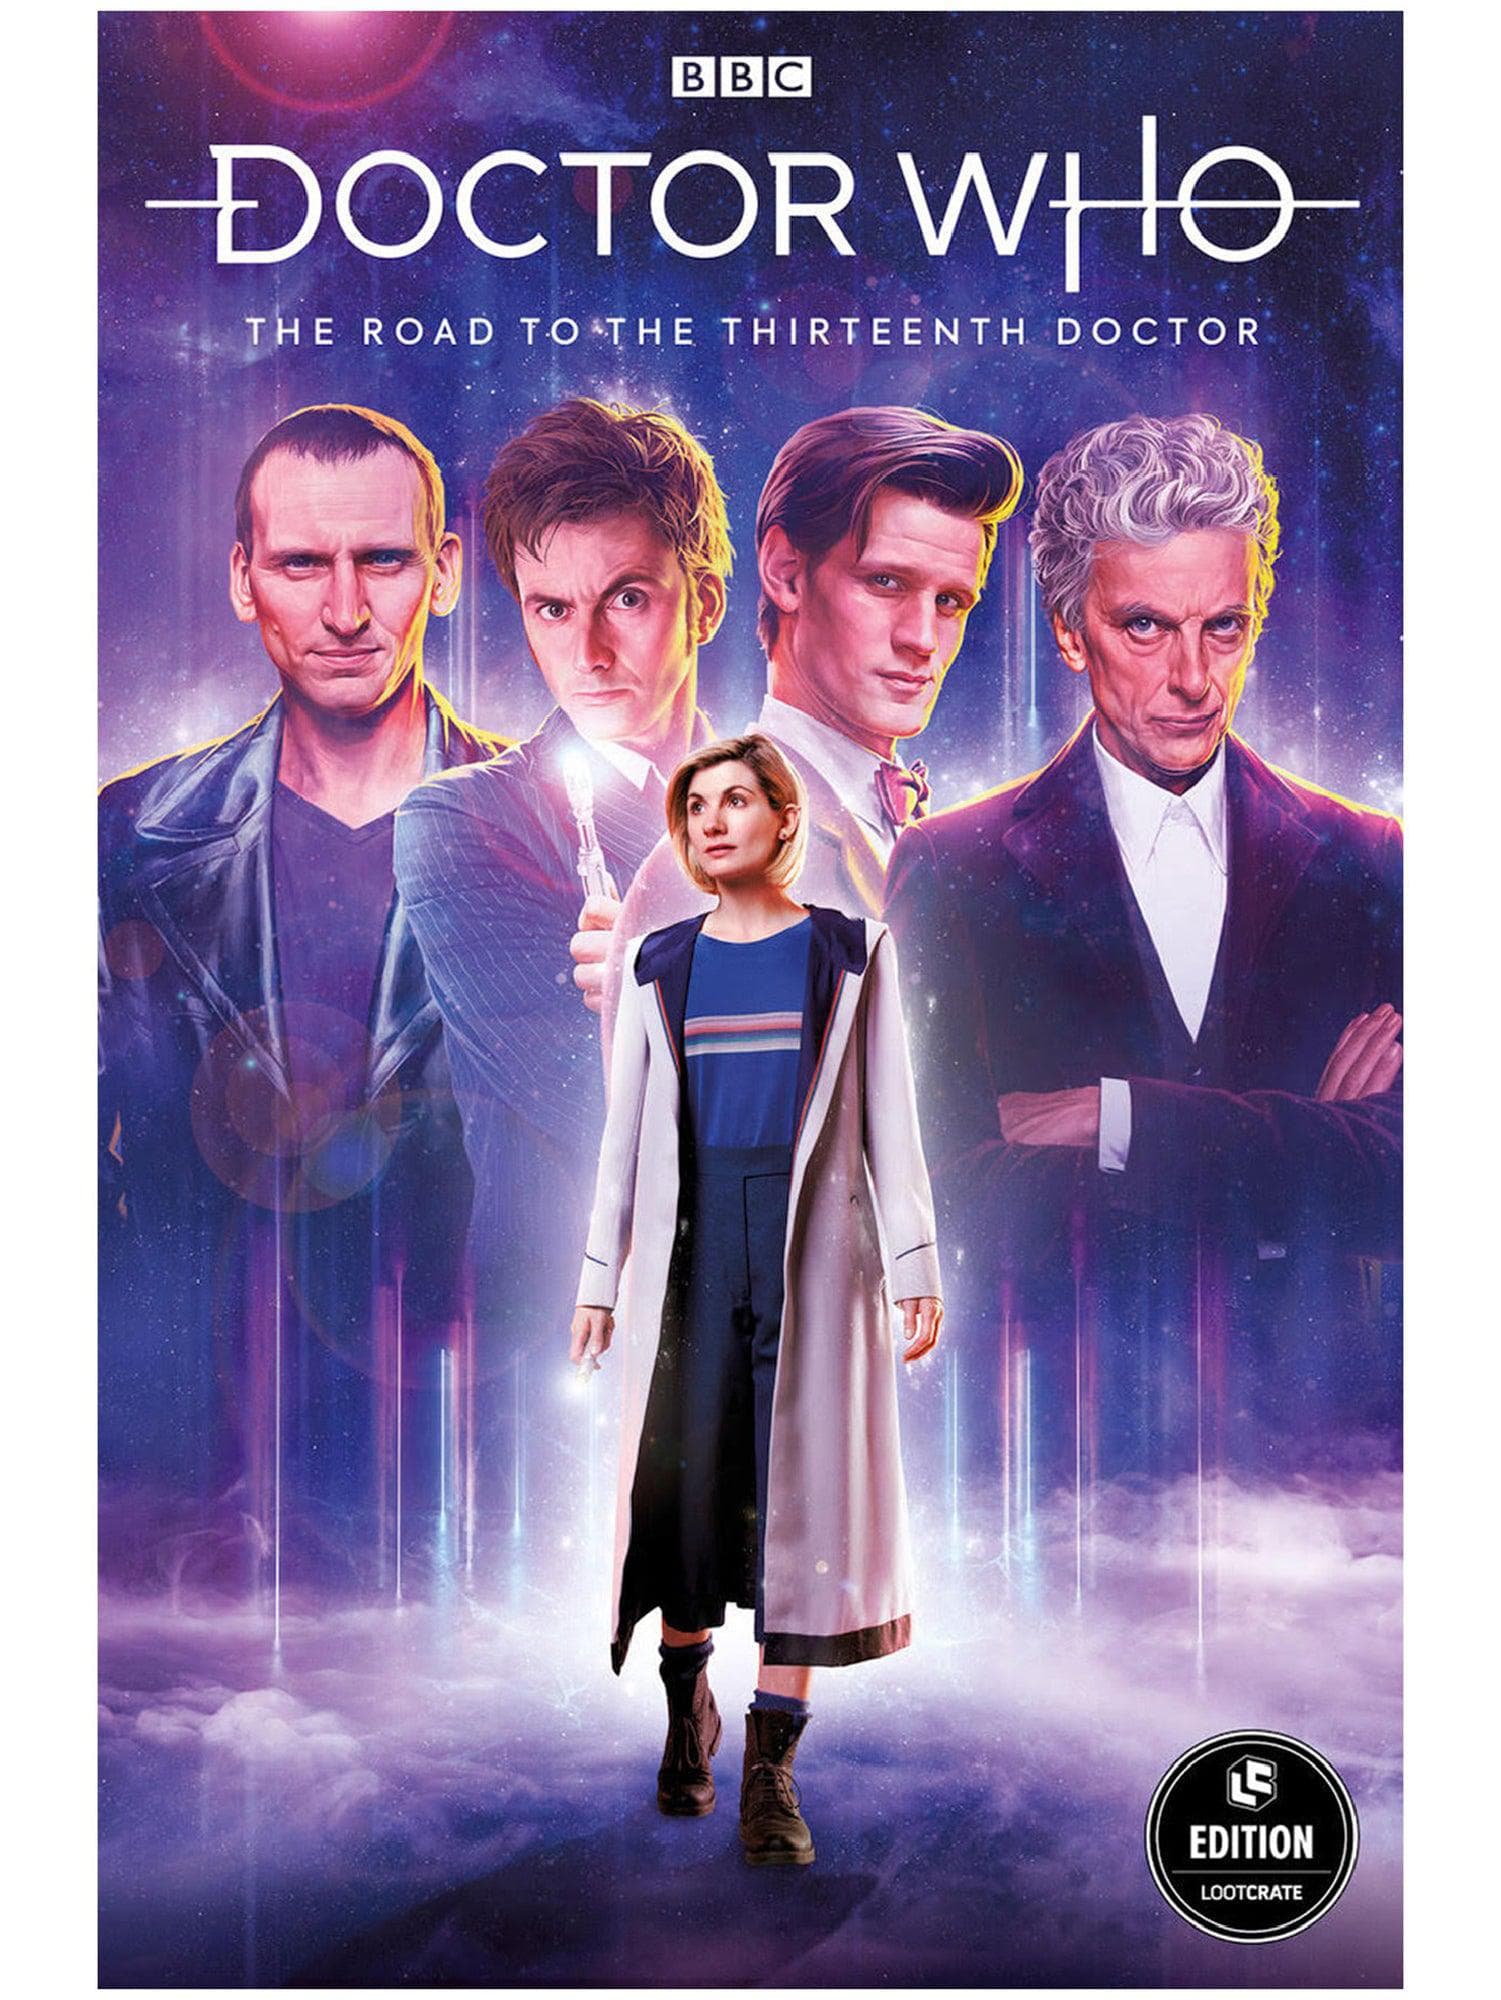 Doctor Who "The Road to the Thirteenth Doctor" Graphic Novel - costumes.com